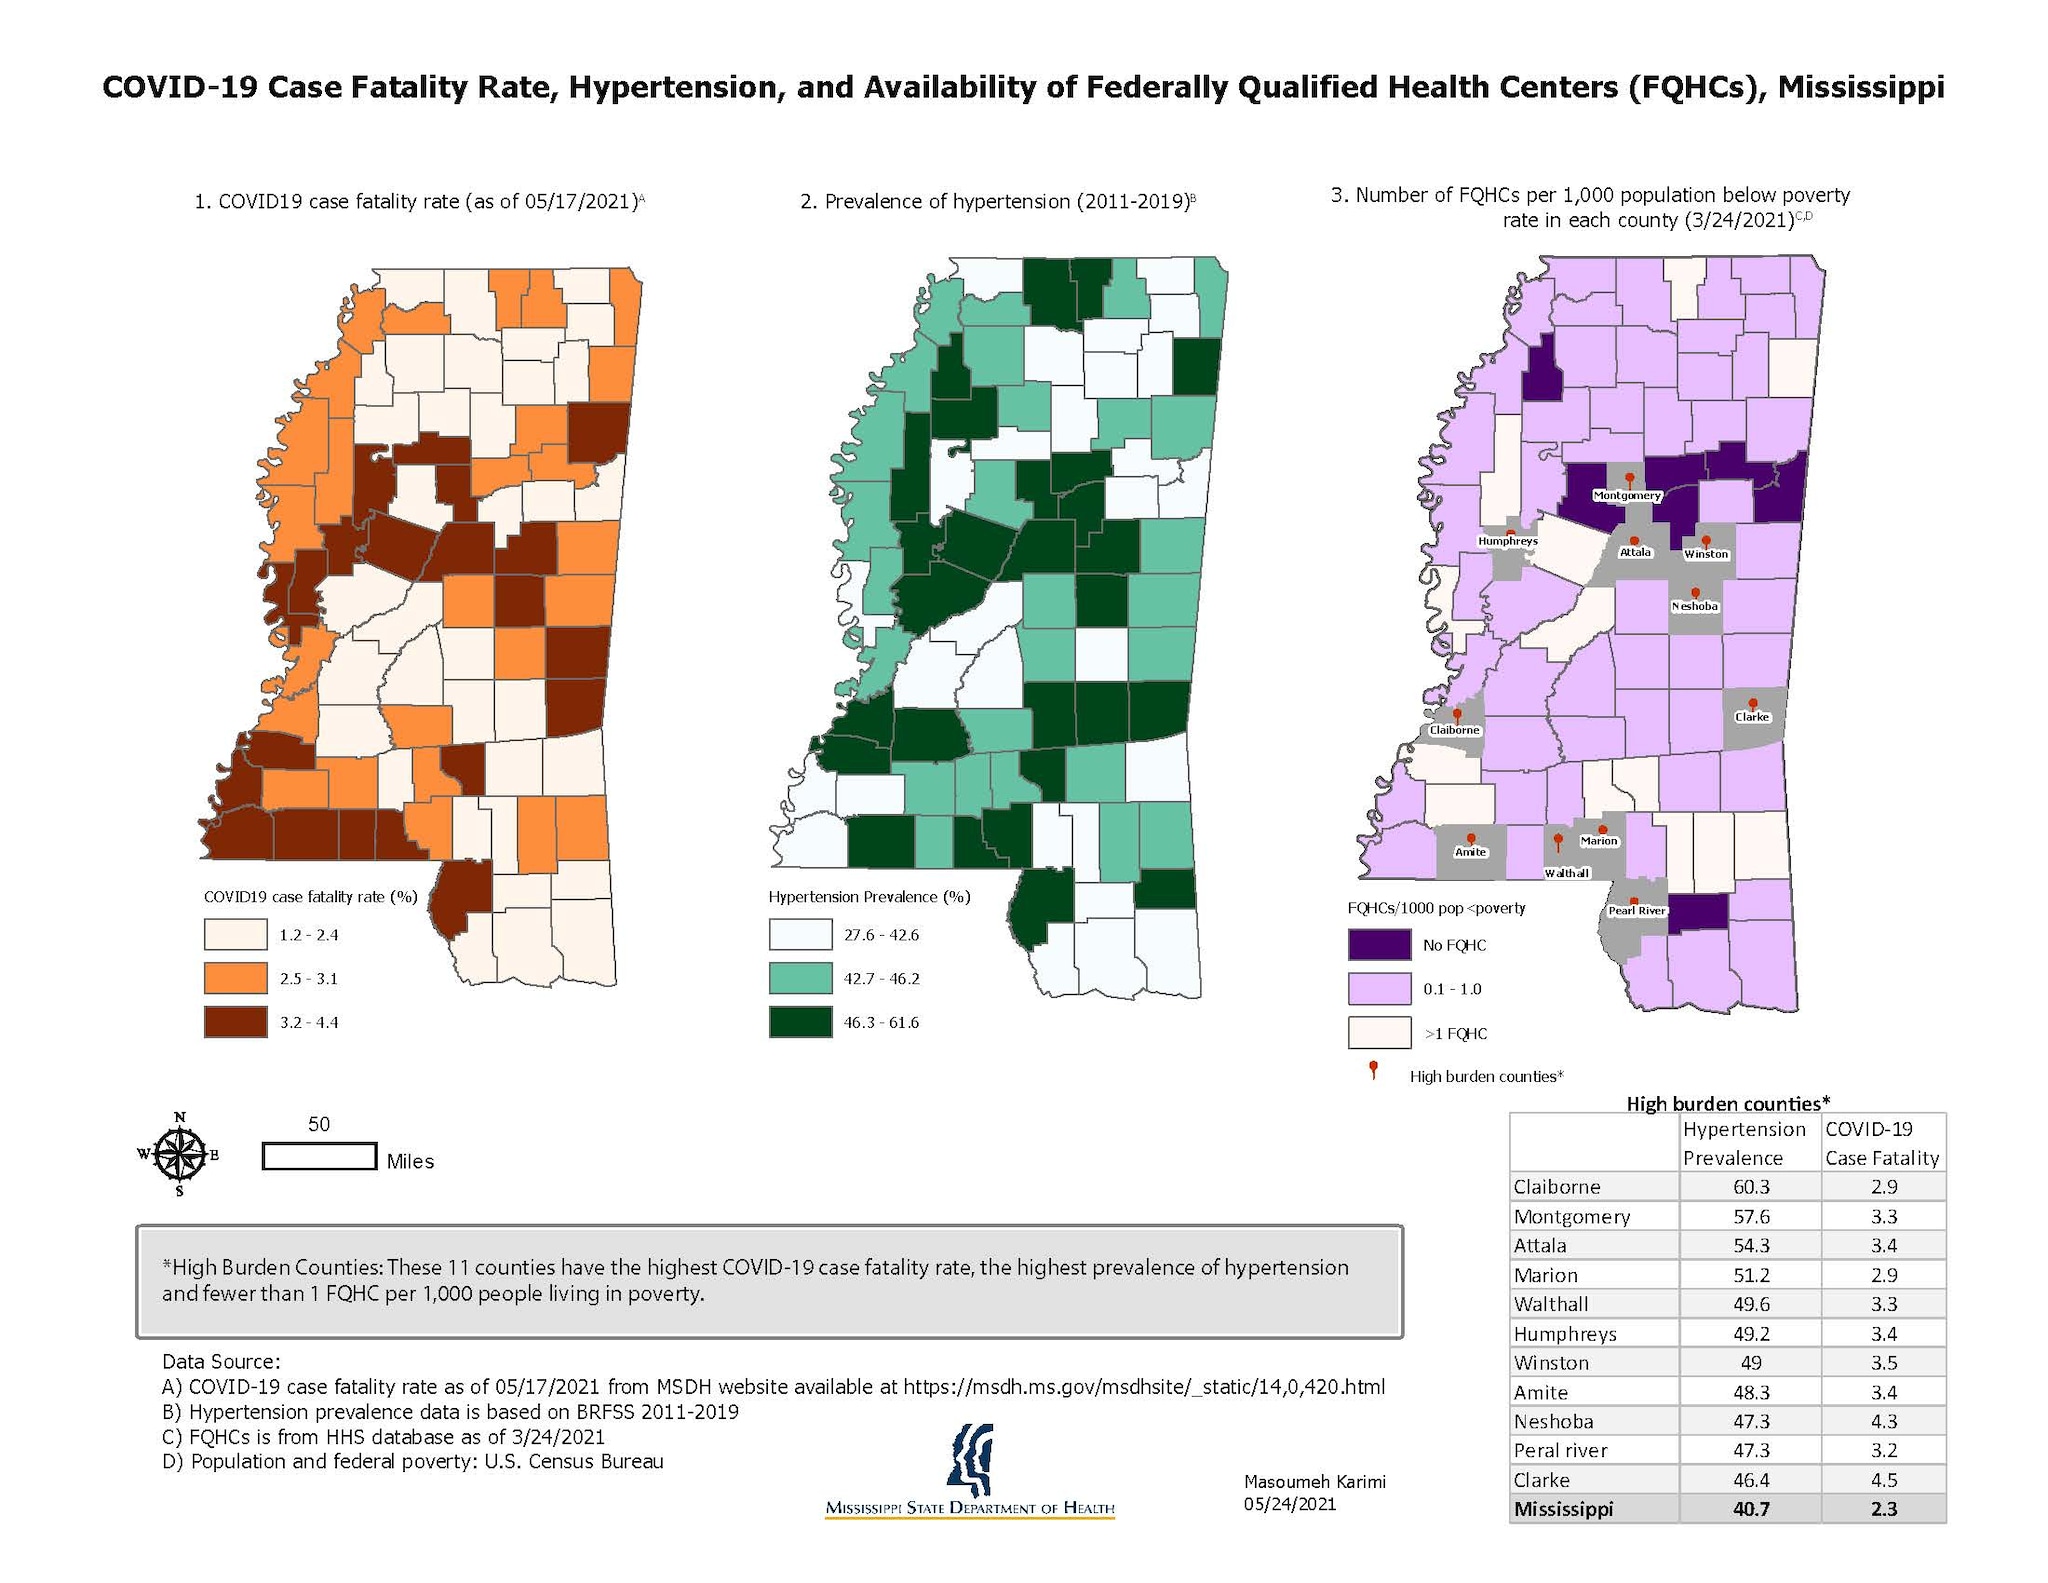 COVID-19 Case Fatality Rate, Hypertension, and Availability of Federally Qualified Health Centers, Mississippi